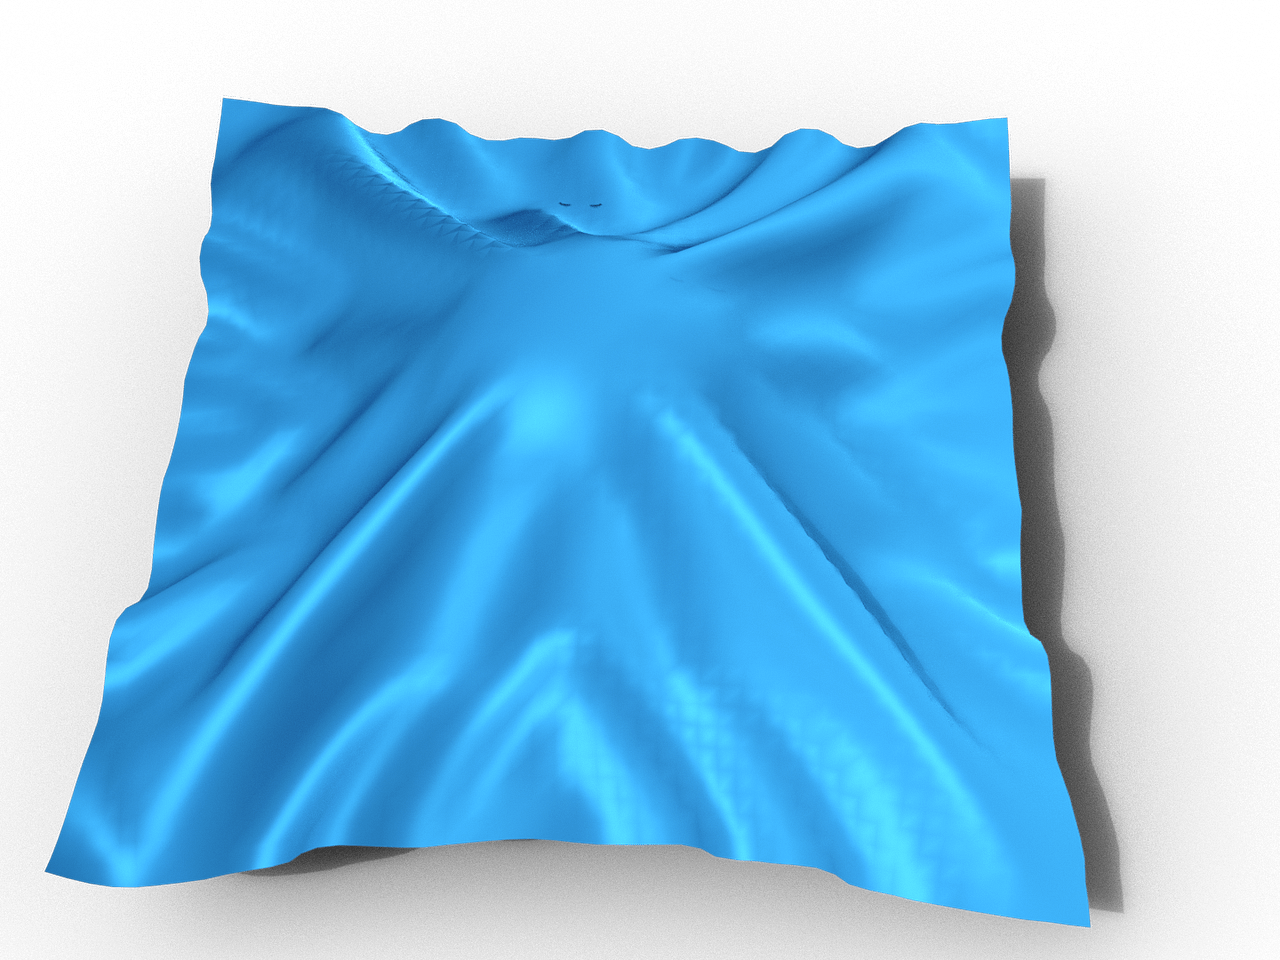 Simulated cloth with dforce in daz studio